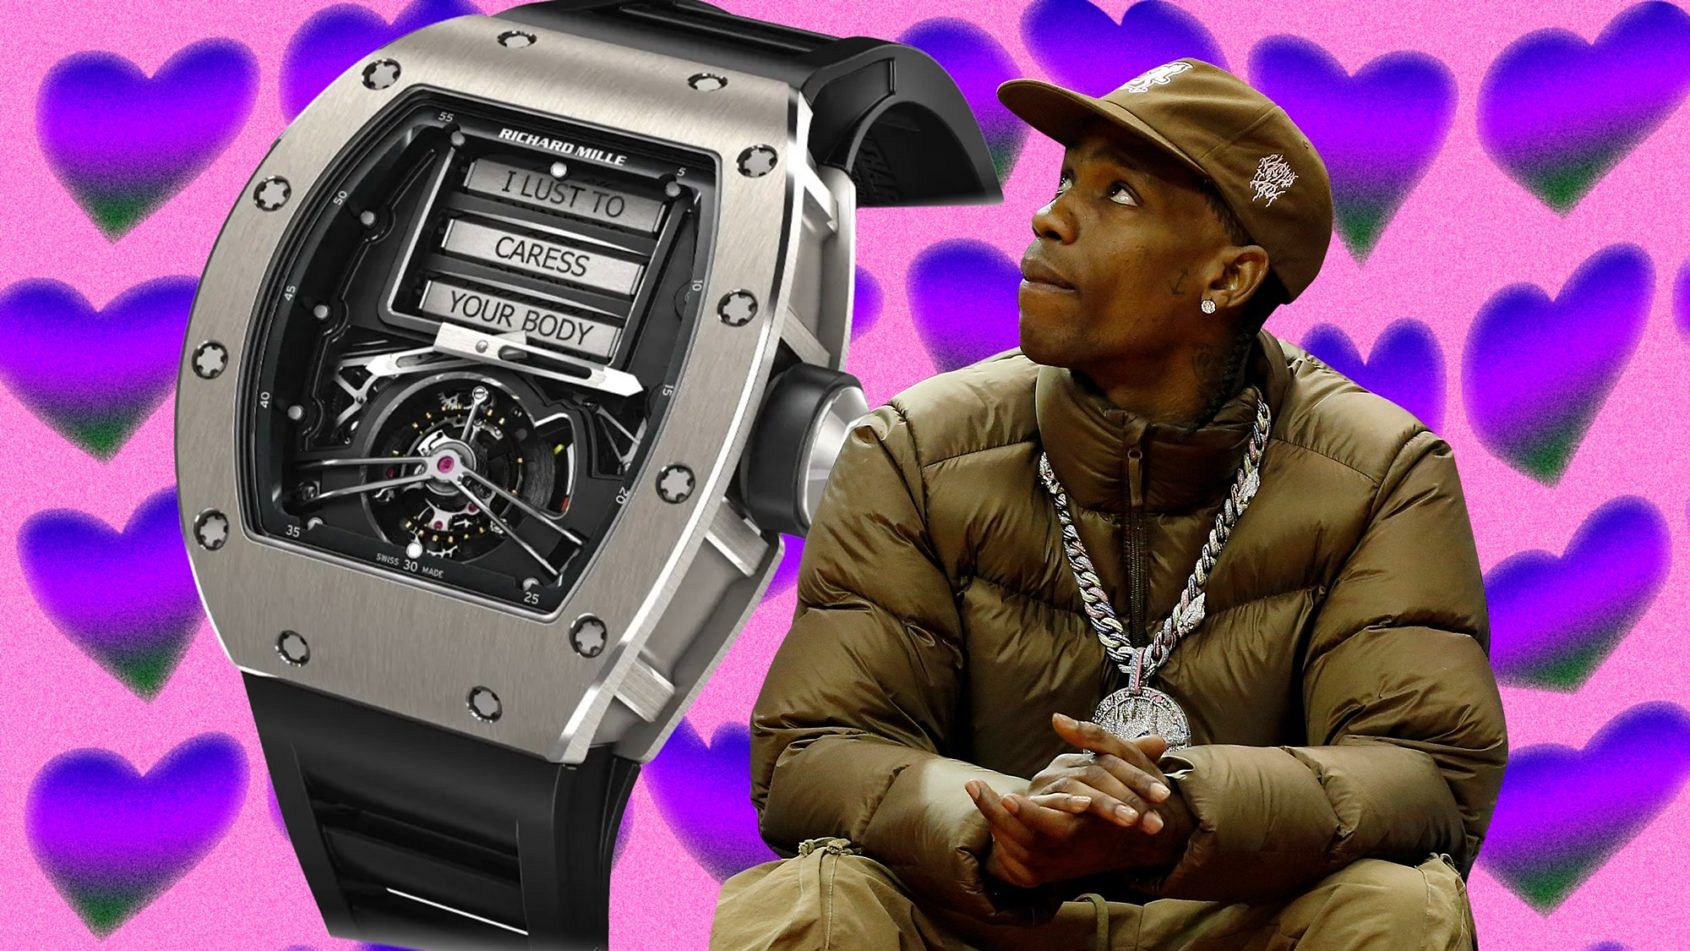 Highest (horology) in the room: the unreal watch collection of Travis Scott